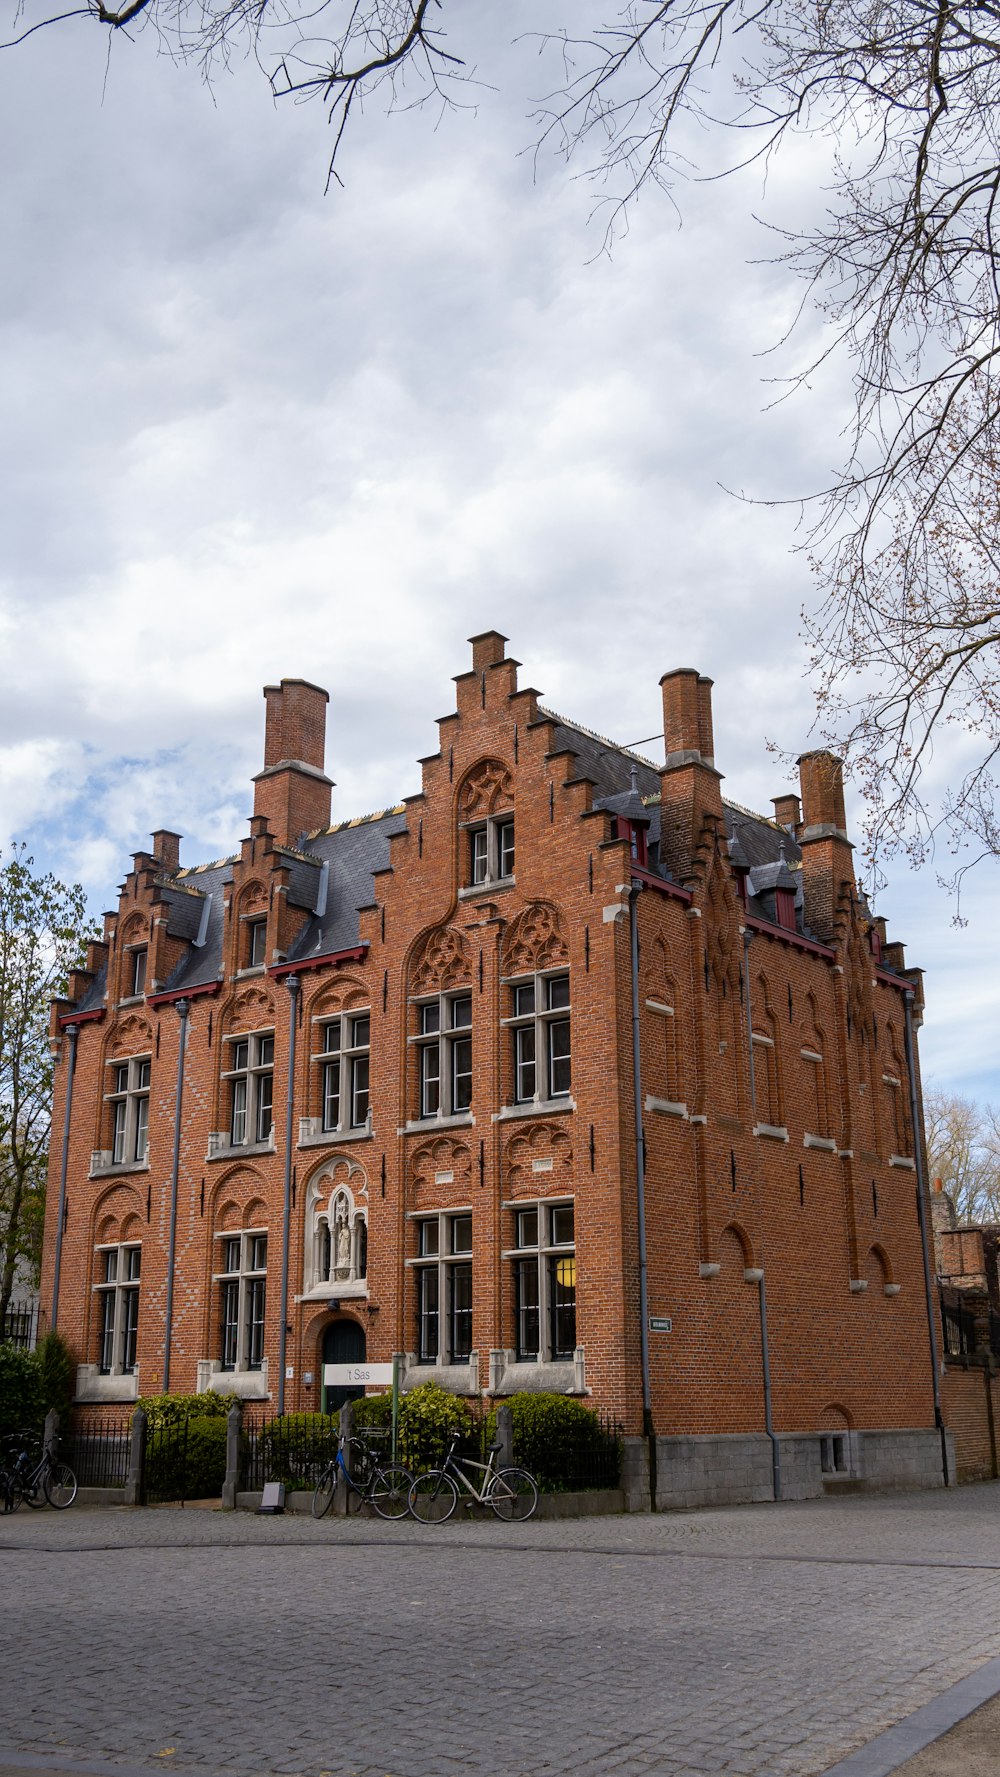 a large red brick building sitting on the side of a road